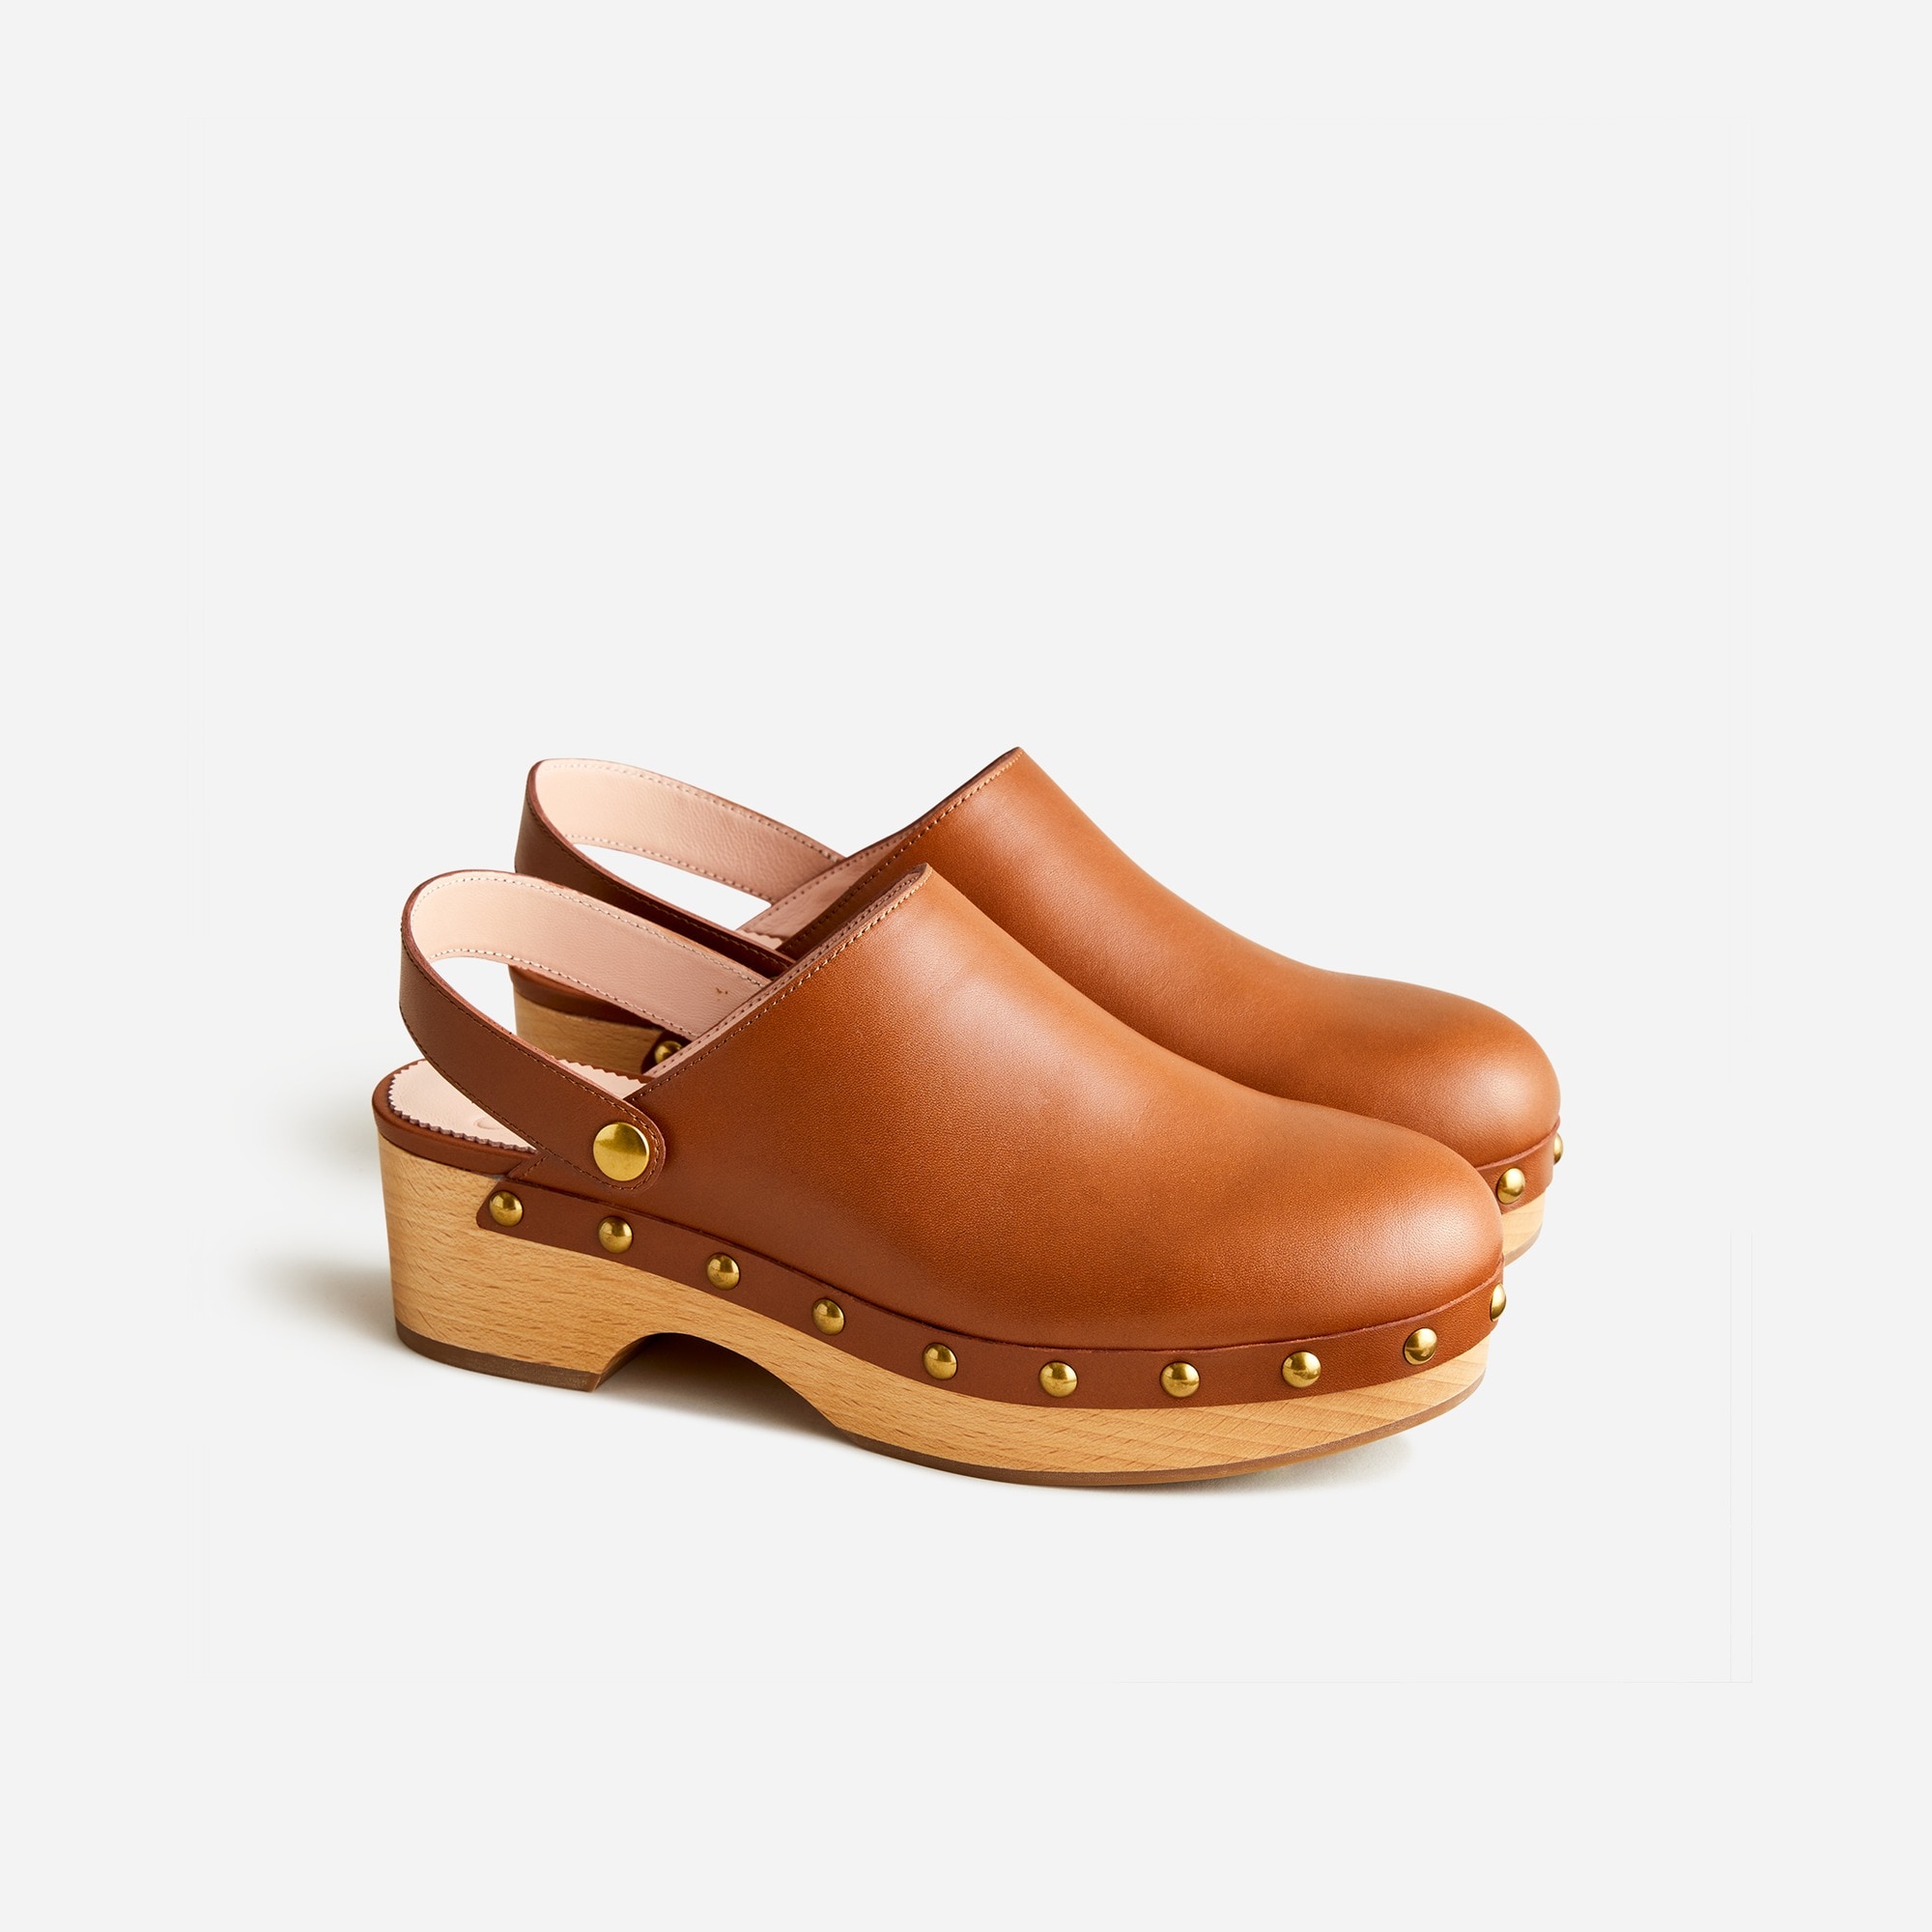  Convertible leather clogs